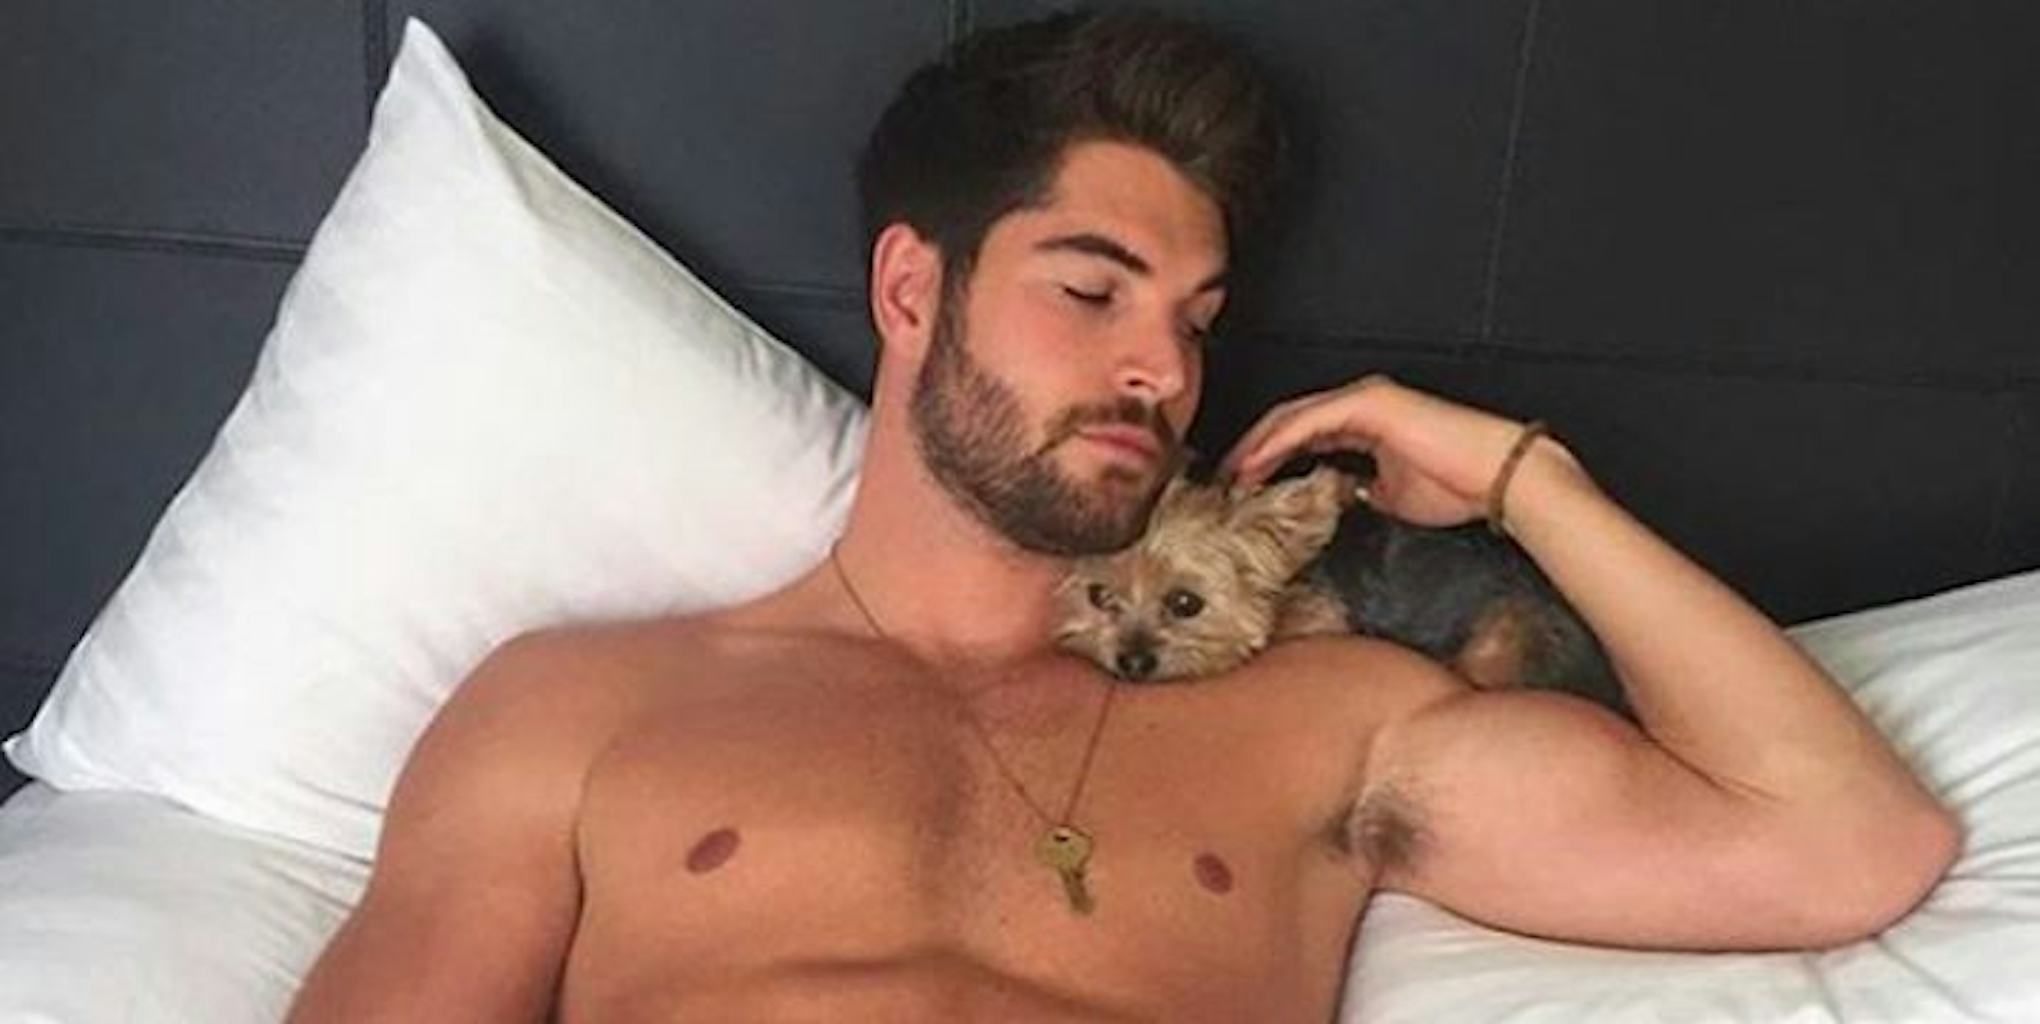 21 Hot Guys With Puppies That Will Make You Go 'Woof'